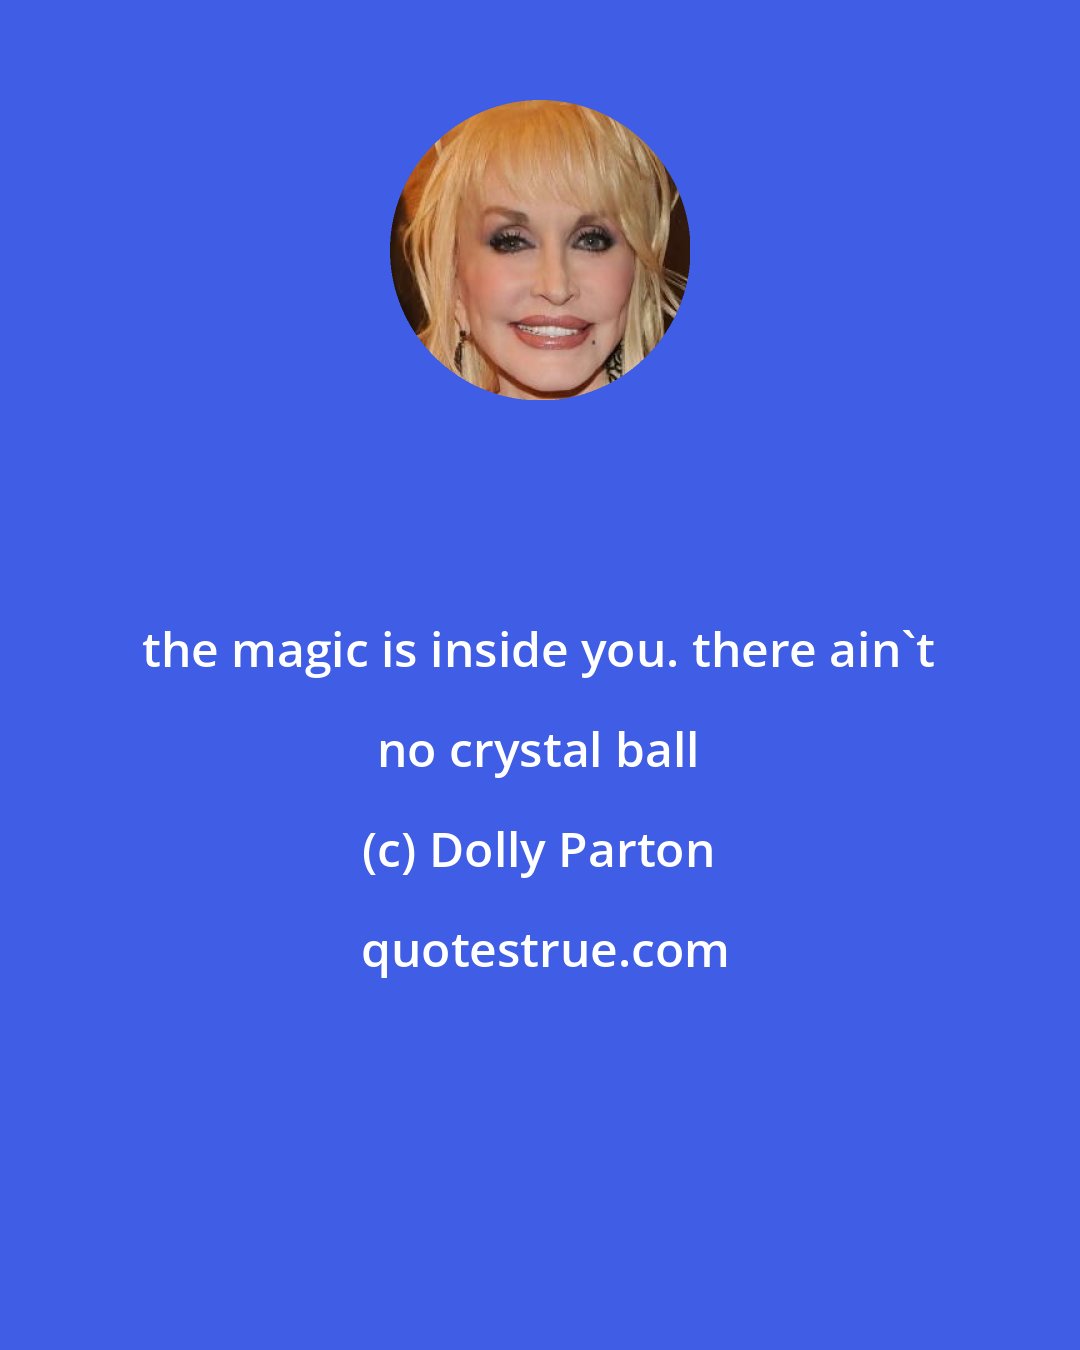 Dolly Parton: the magic is inside you. there ain't no crystal ball